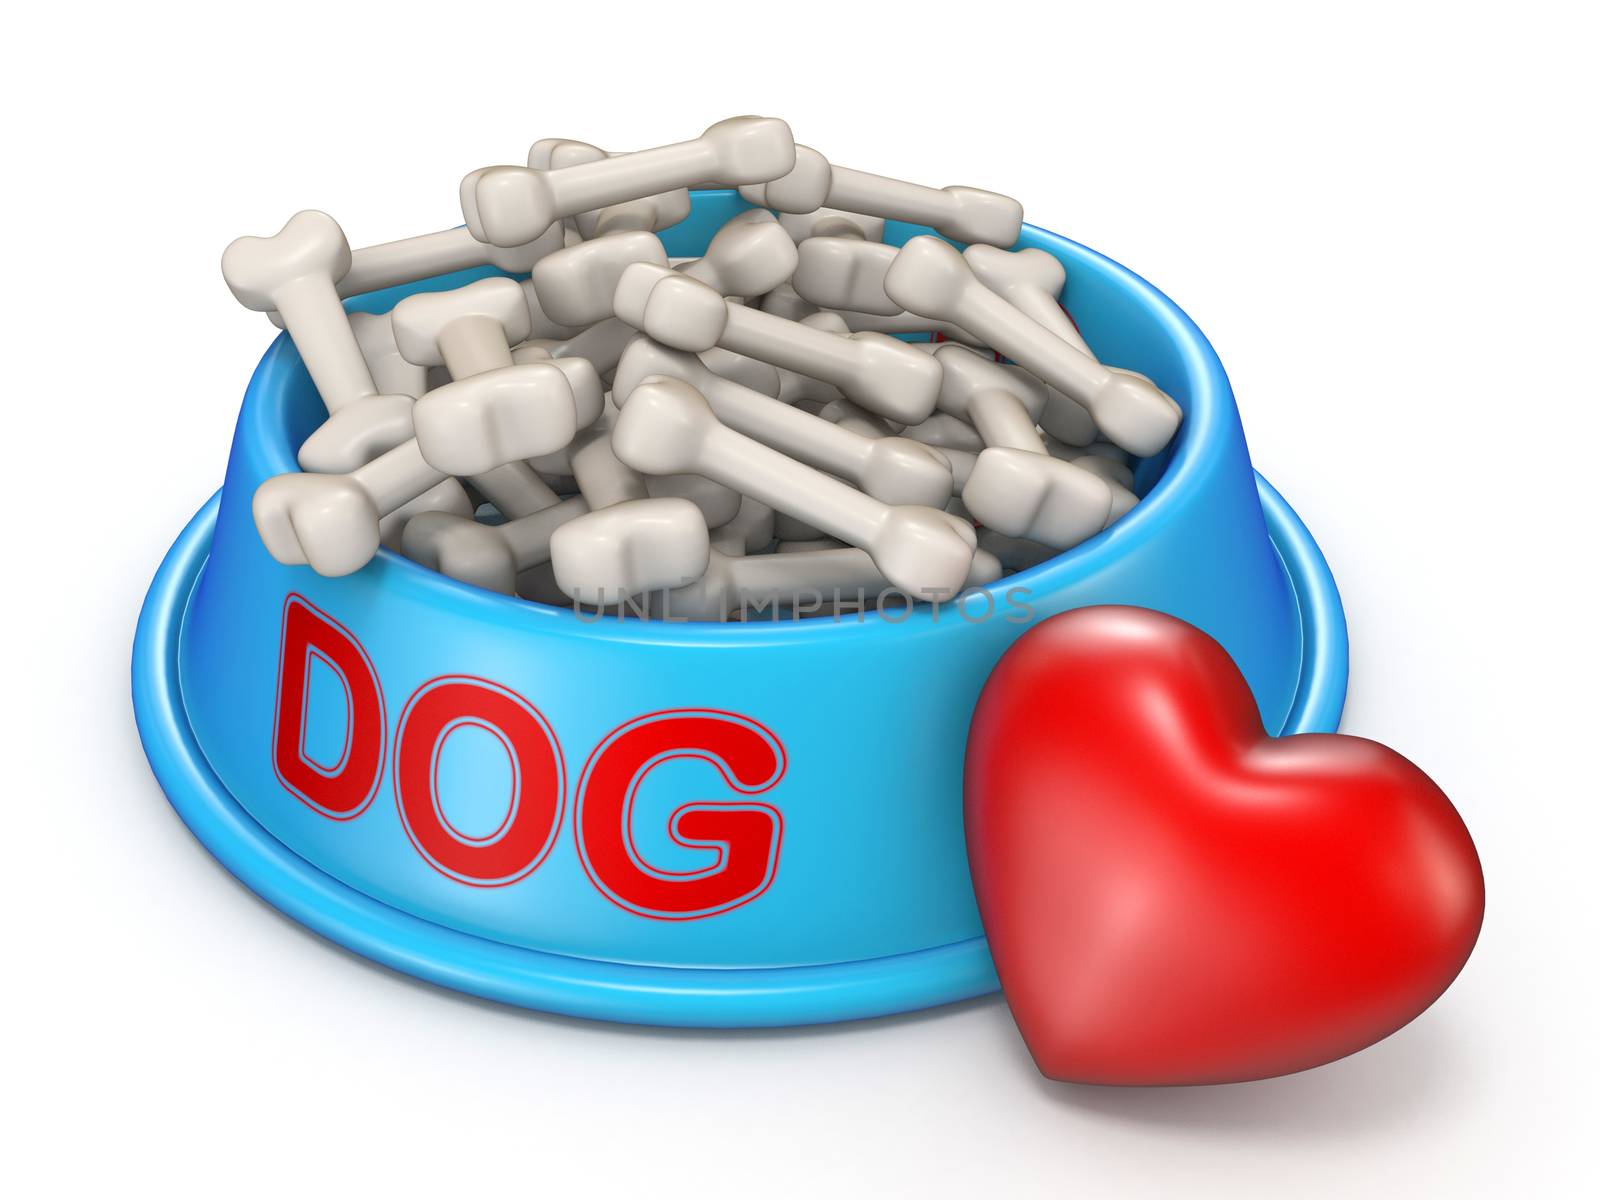 Dog food bowl and red heart 3D rendering illustration isolated on white background